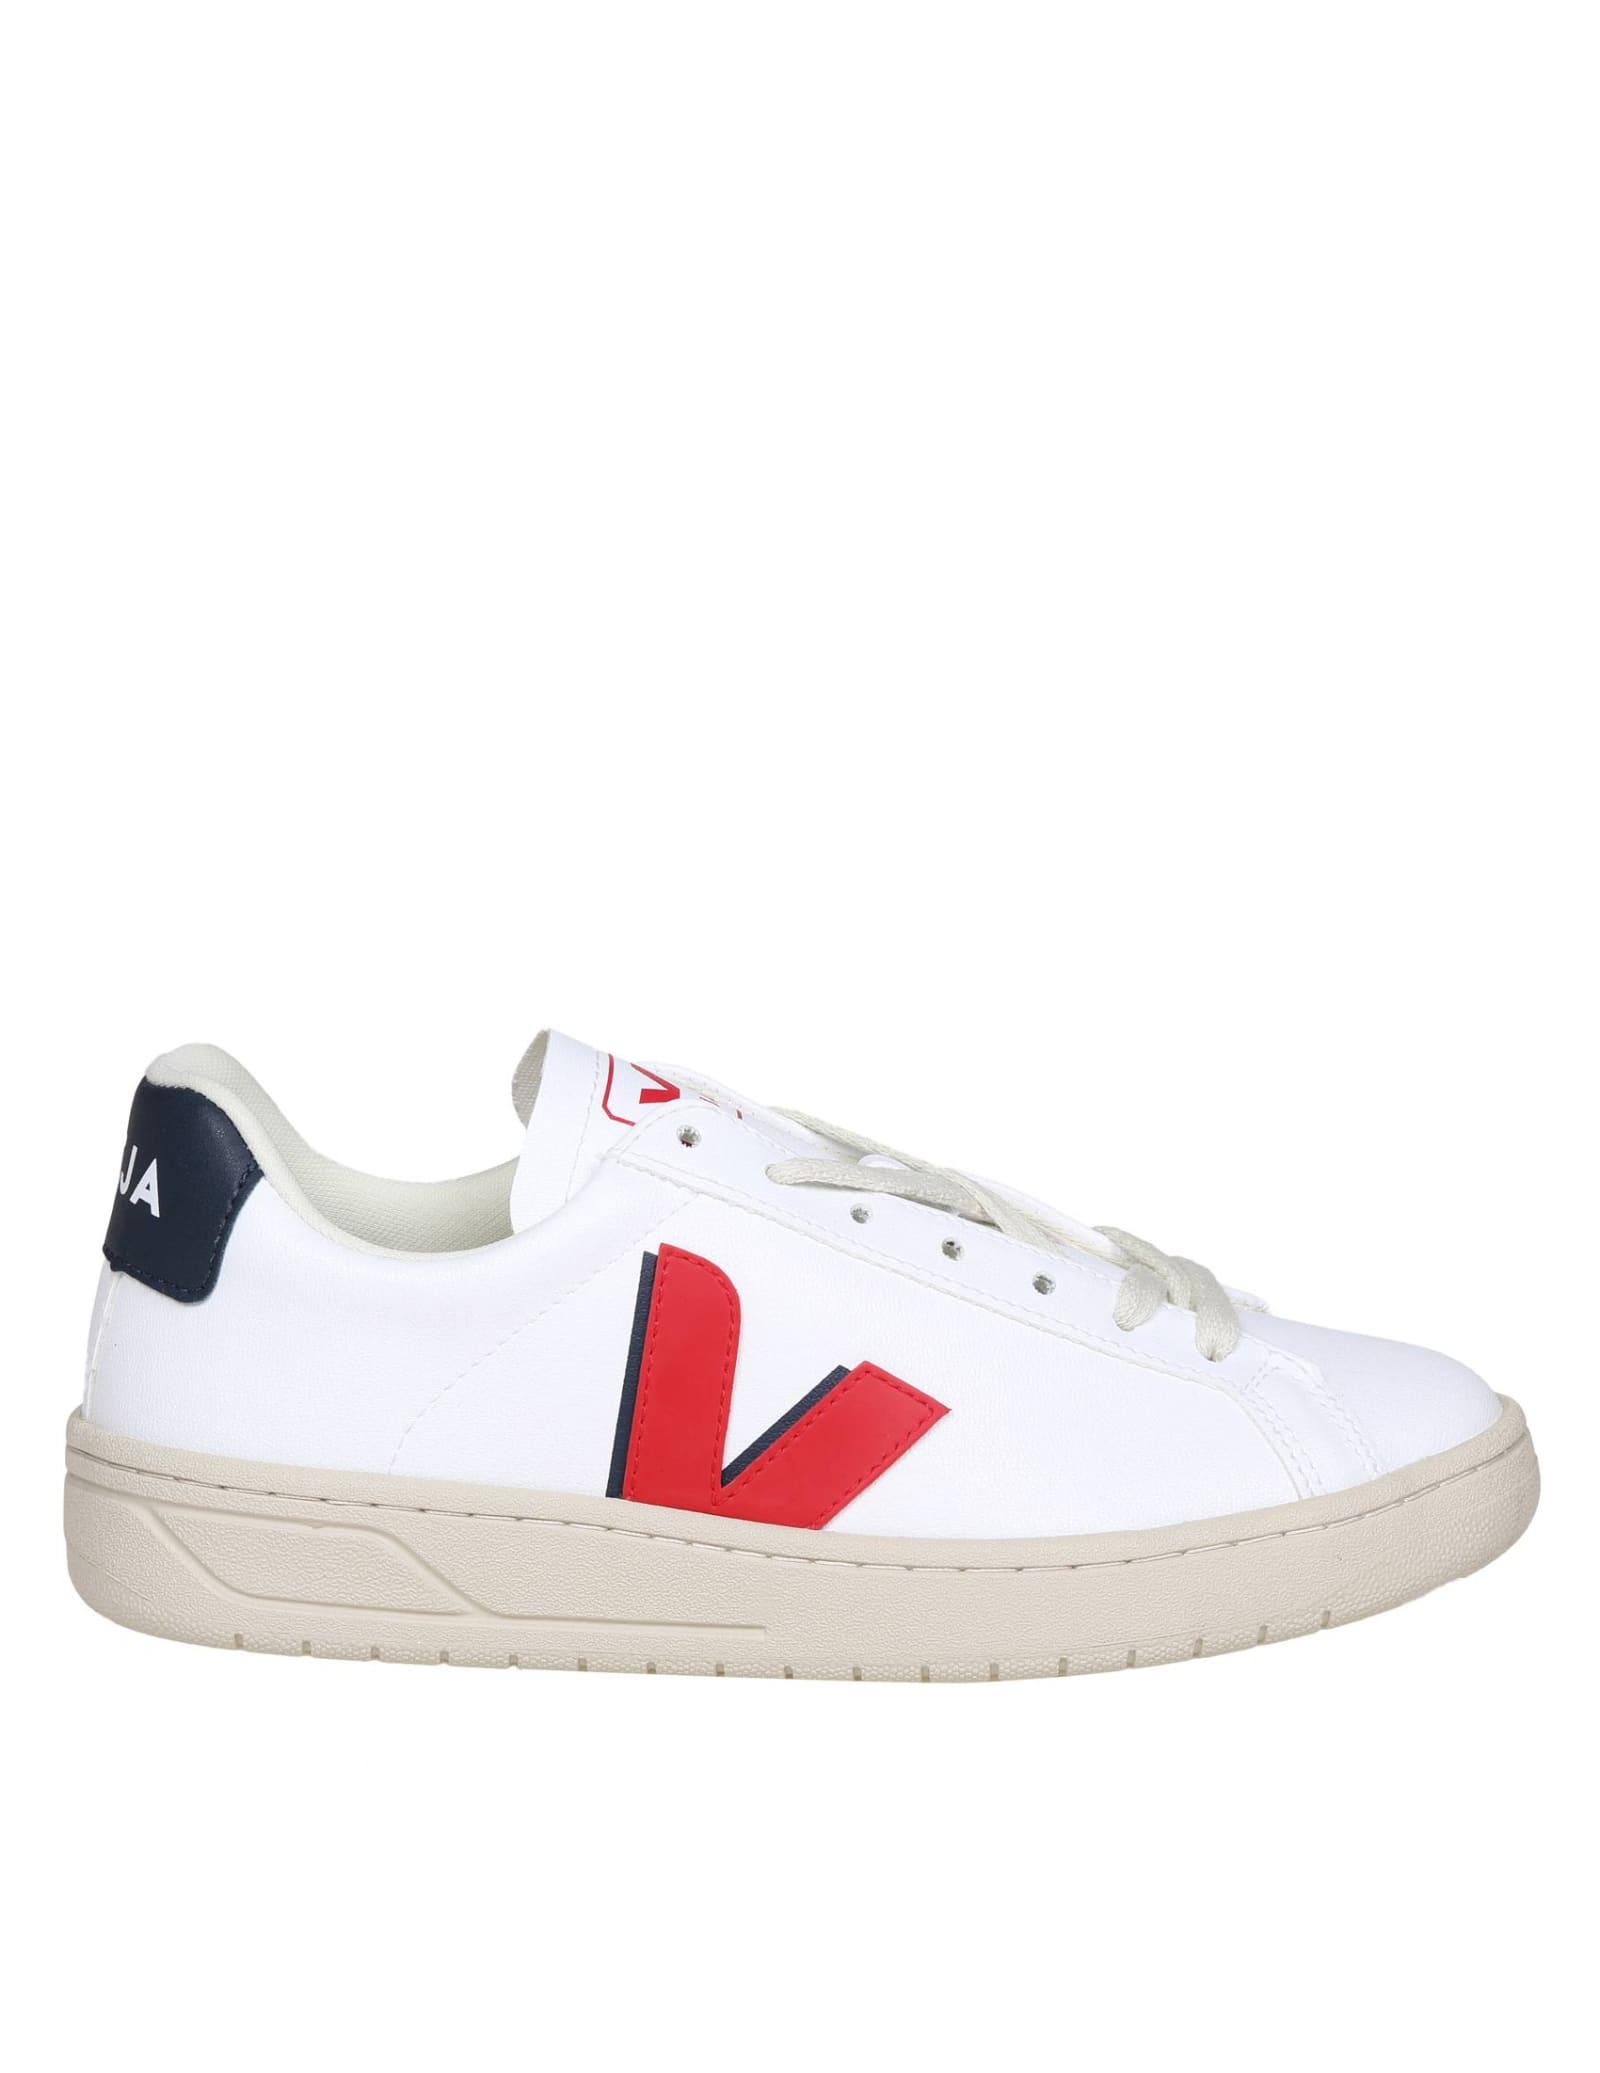 Campo Chromefree In White/red Leather